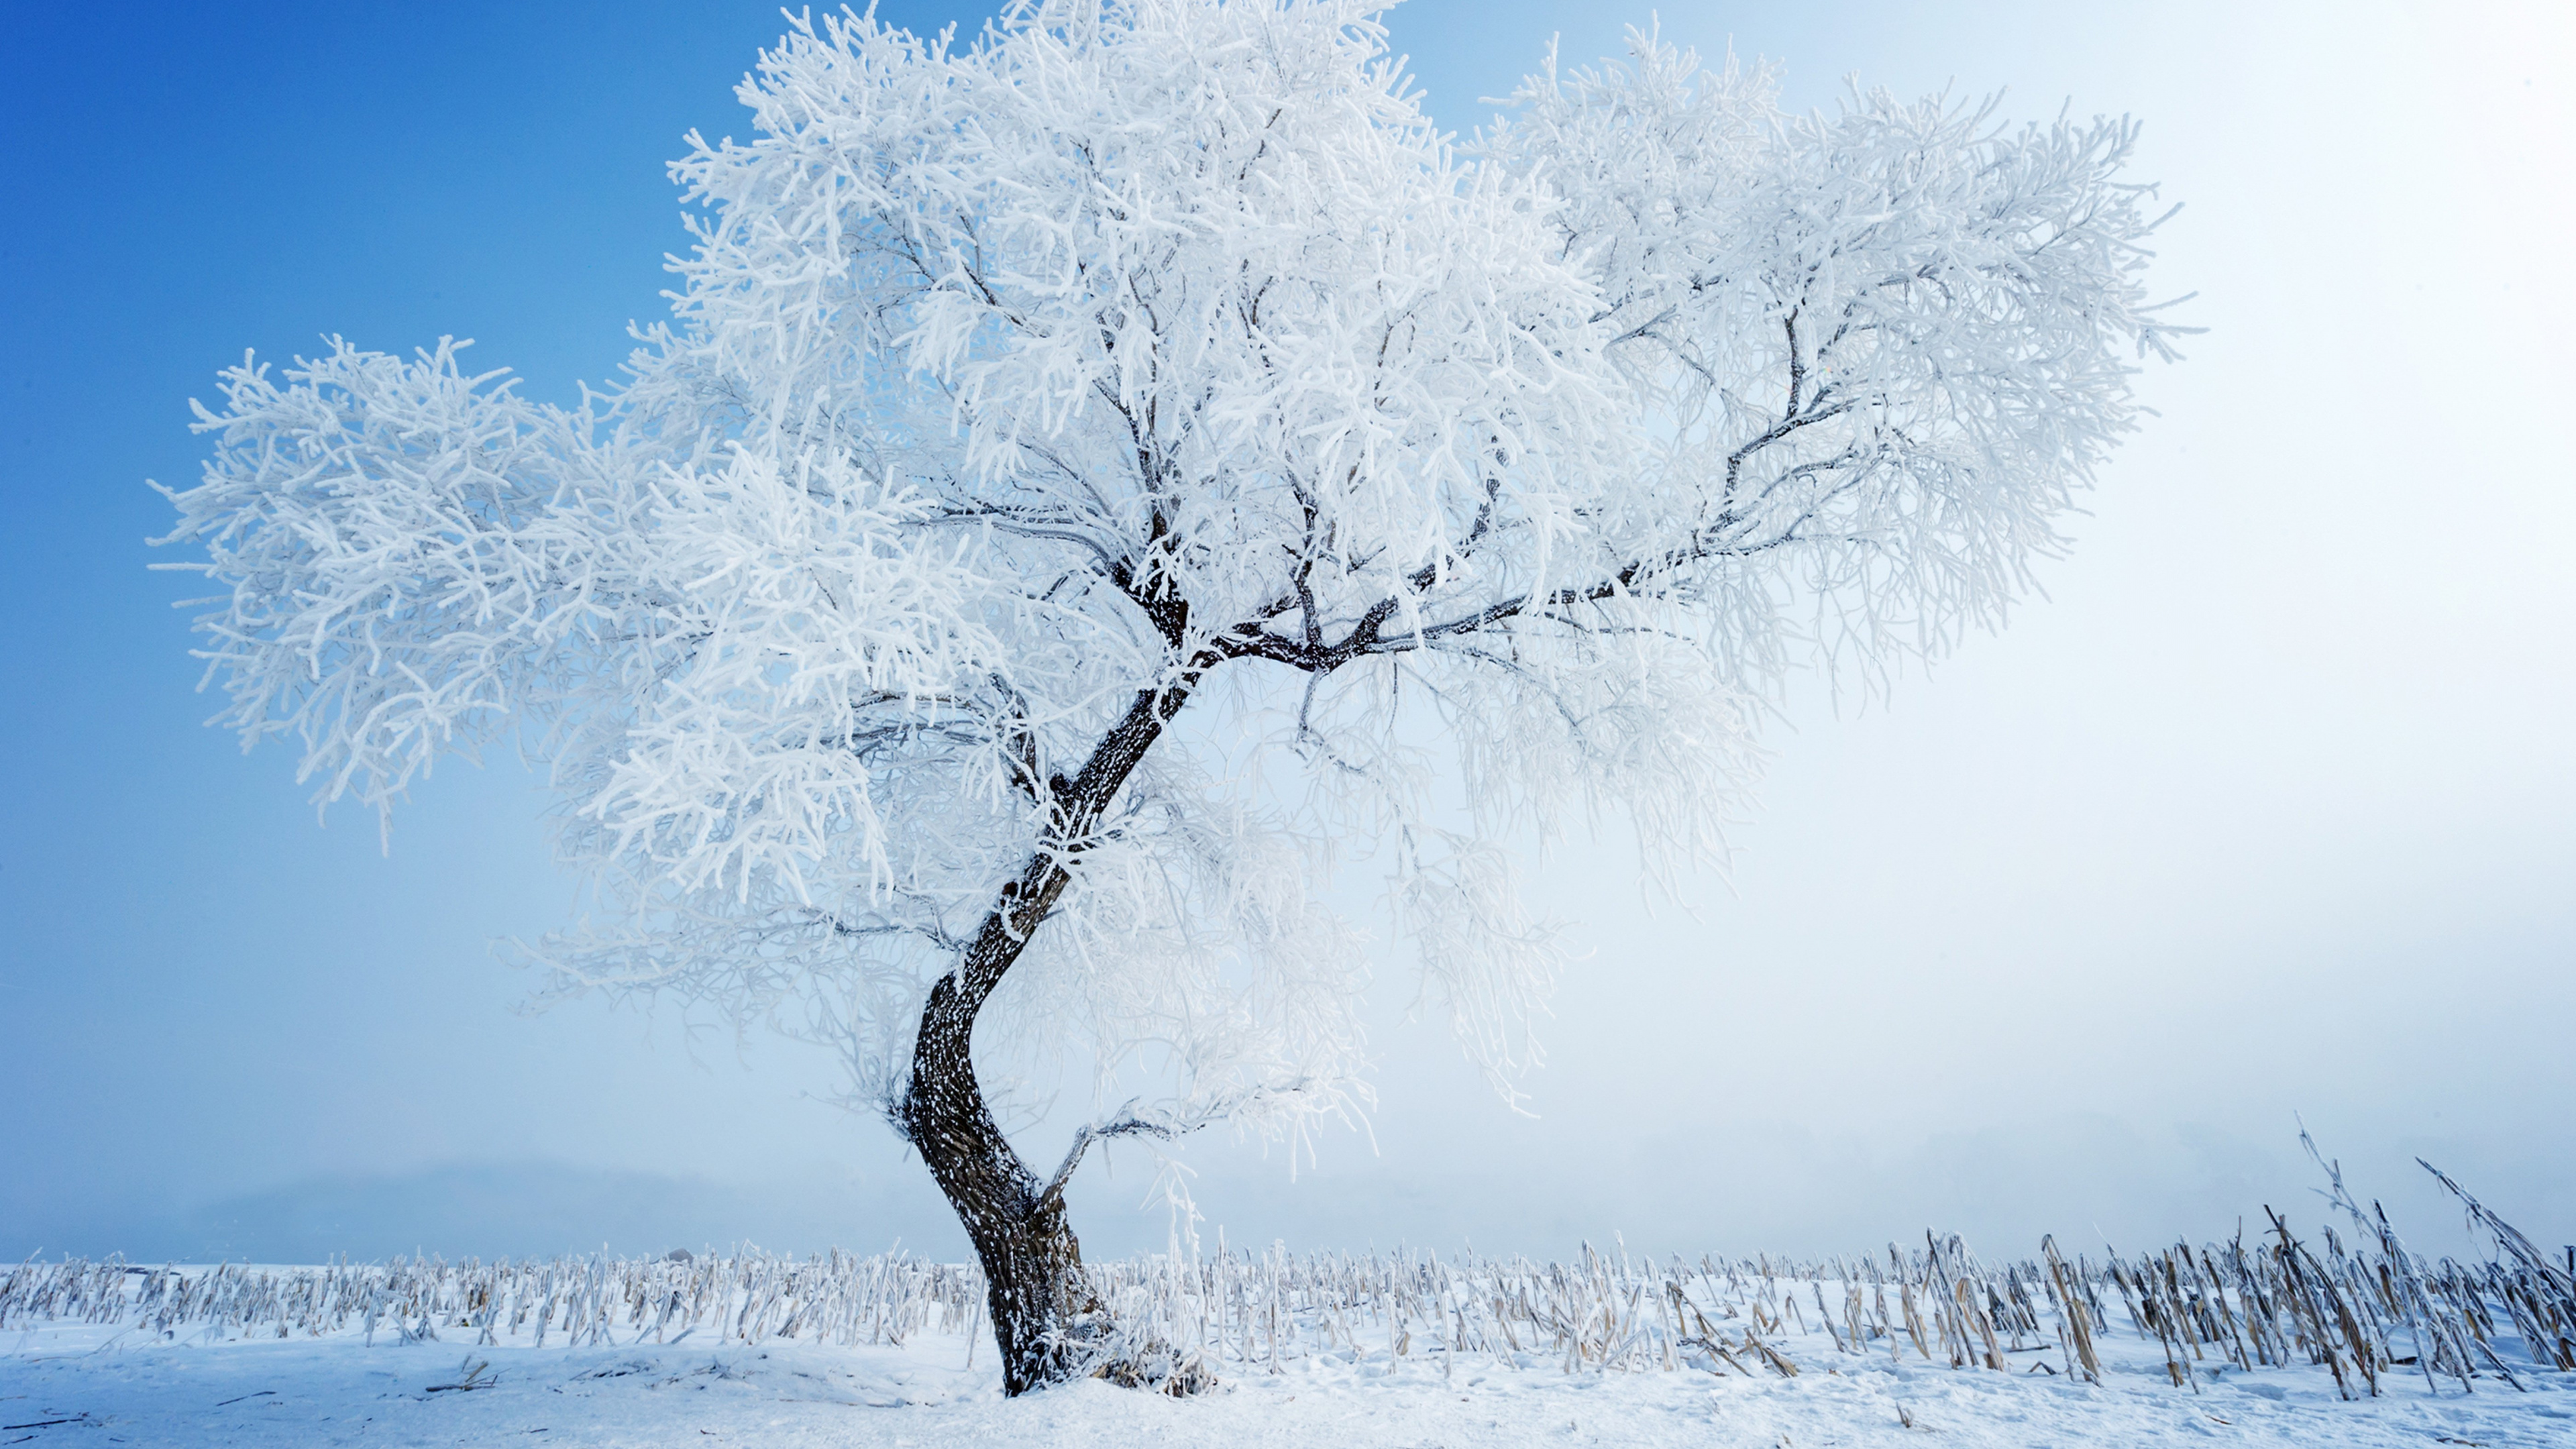 Snow Covered Bare Tree During Daytime. Wallpaper in 3840x2160 Resolution